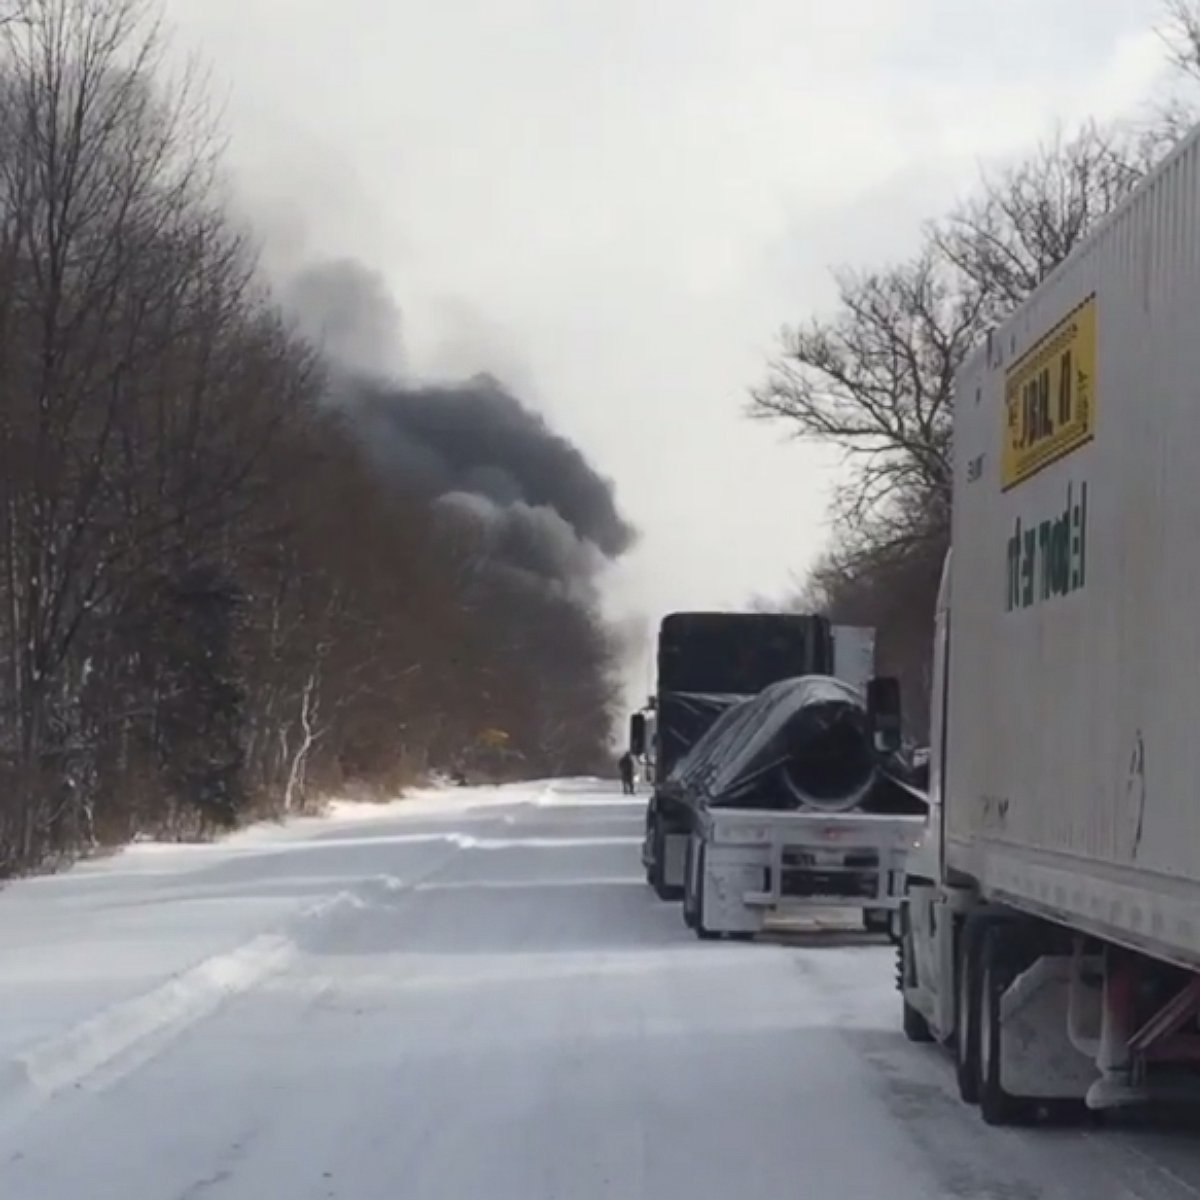 PHOTO: Smoke billows from a large accident on I-94 near Kalamazoo, Mich., on Jan. 9, 2015.